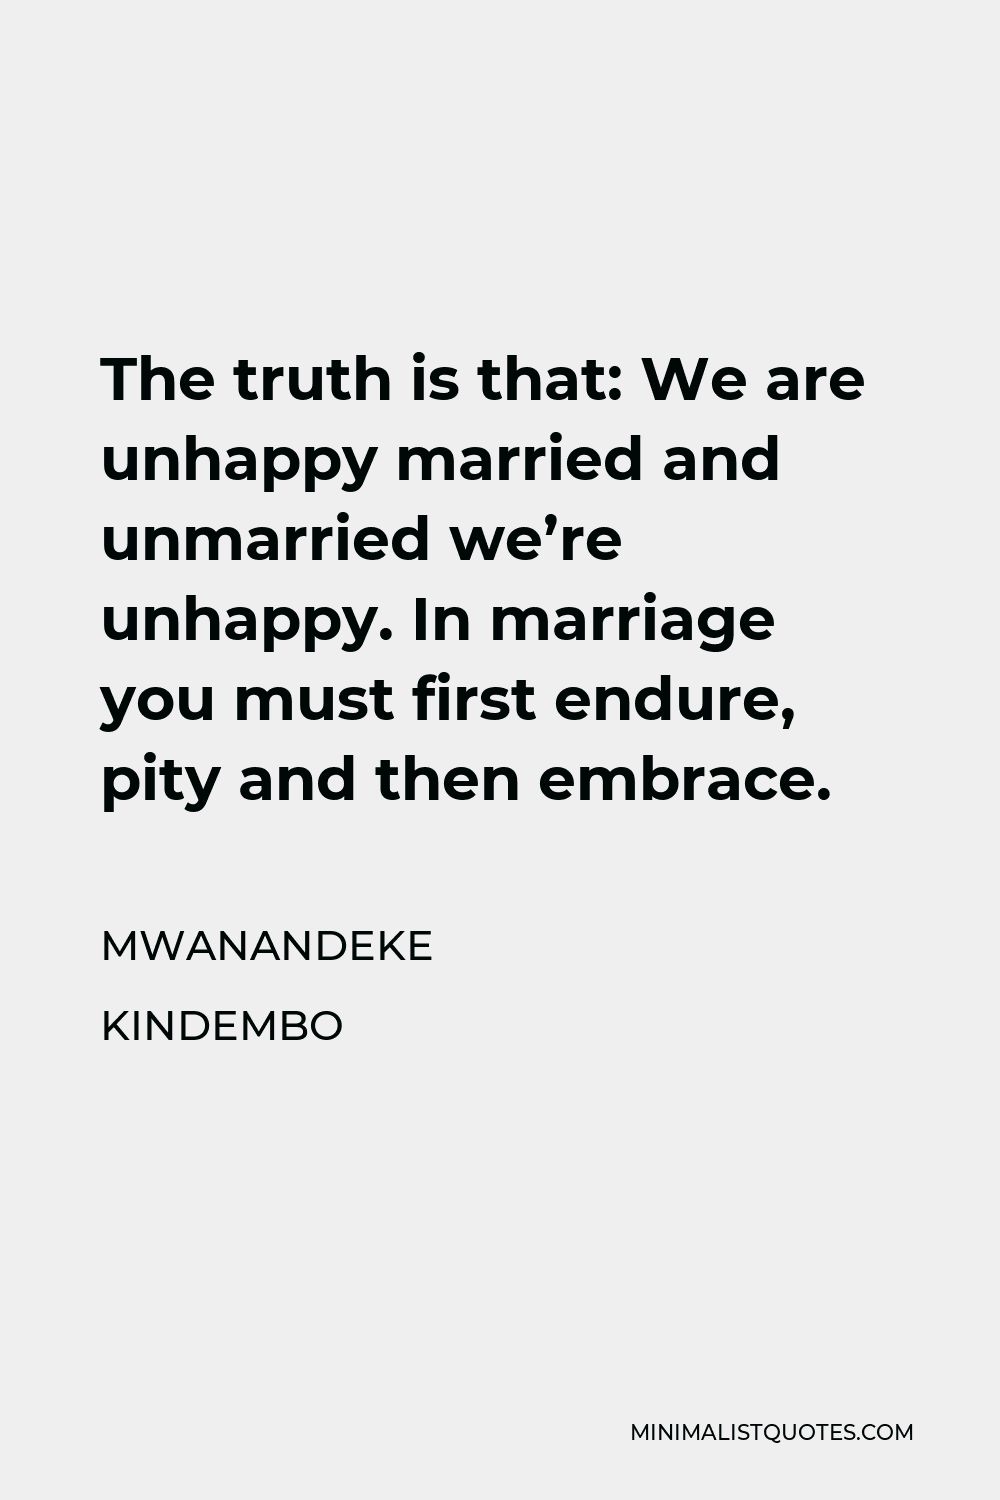 Mwanandeke Kindembo Quote - The truth is that: We are unhappy married and unmarried we’re unhappy. In marriage you must first endure, pity and then embrace.